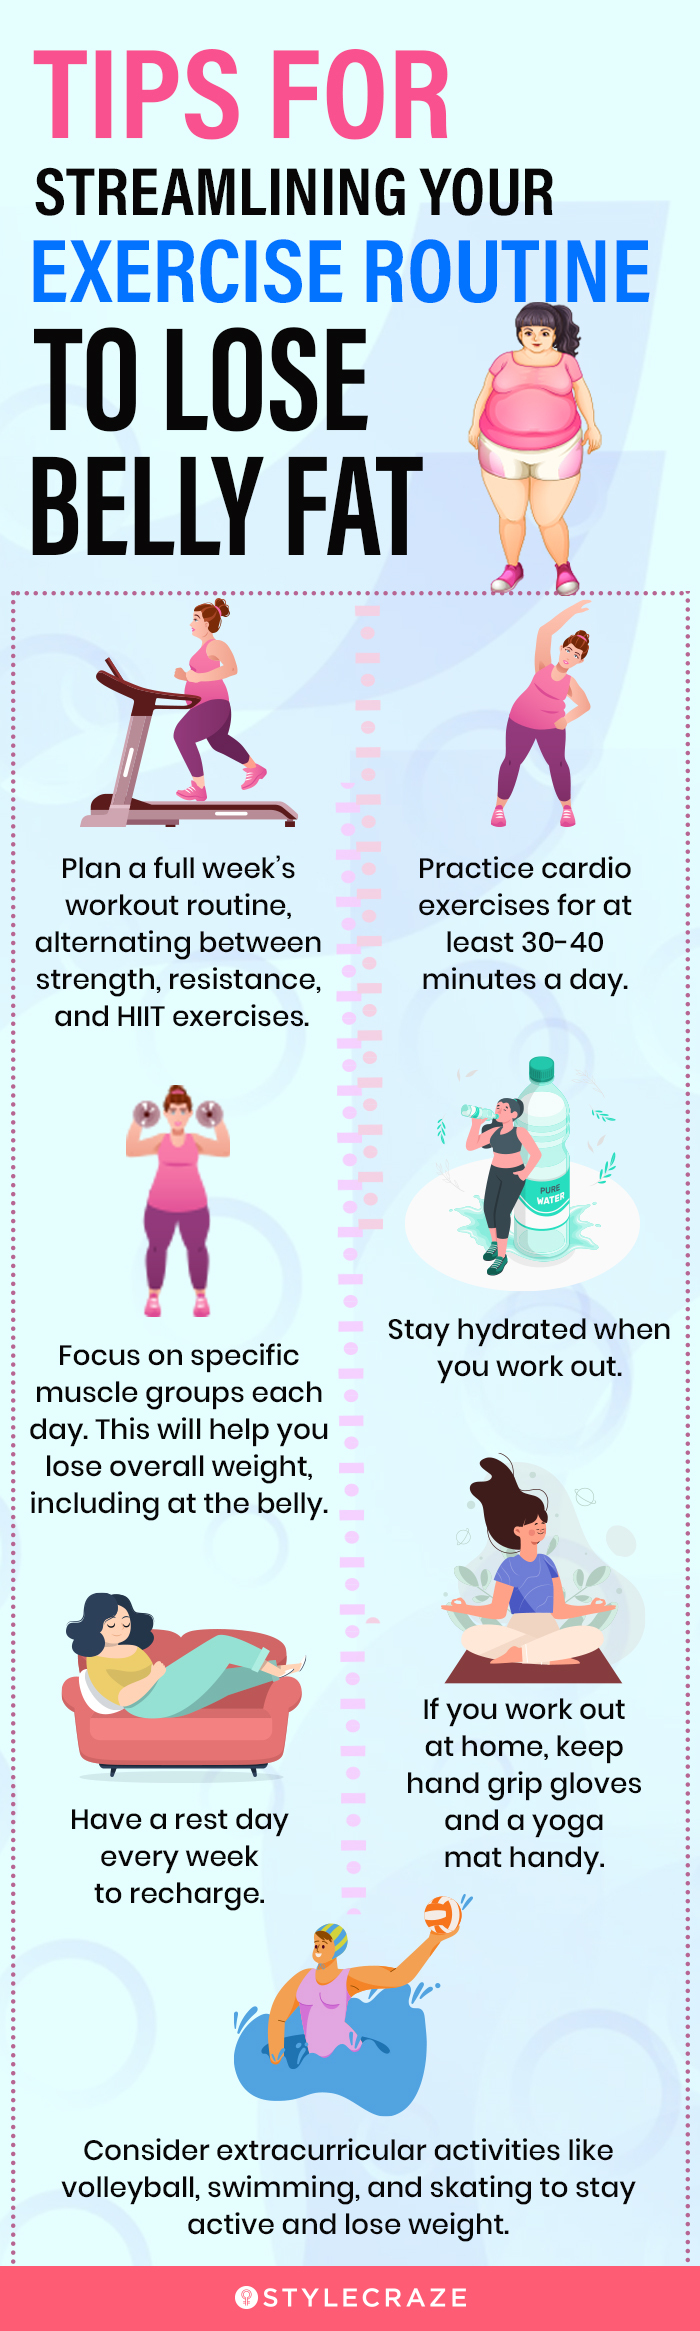 tips for streamlining your exercise routine to lose belly fat [infographic]